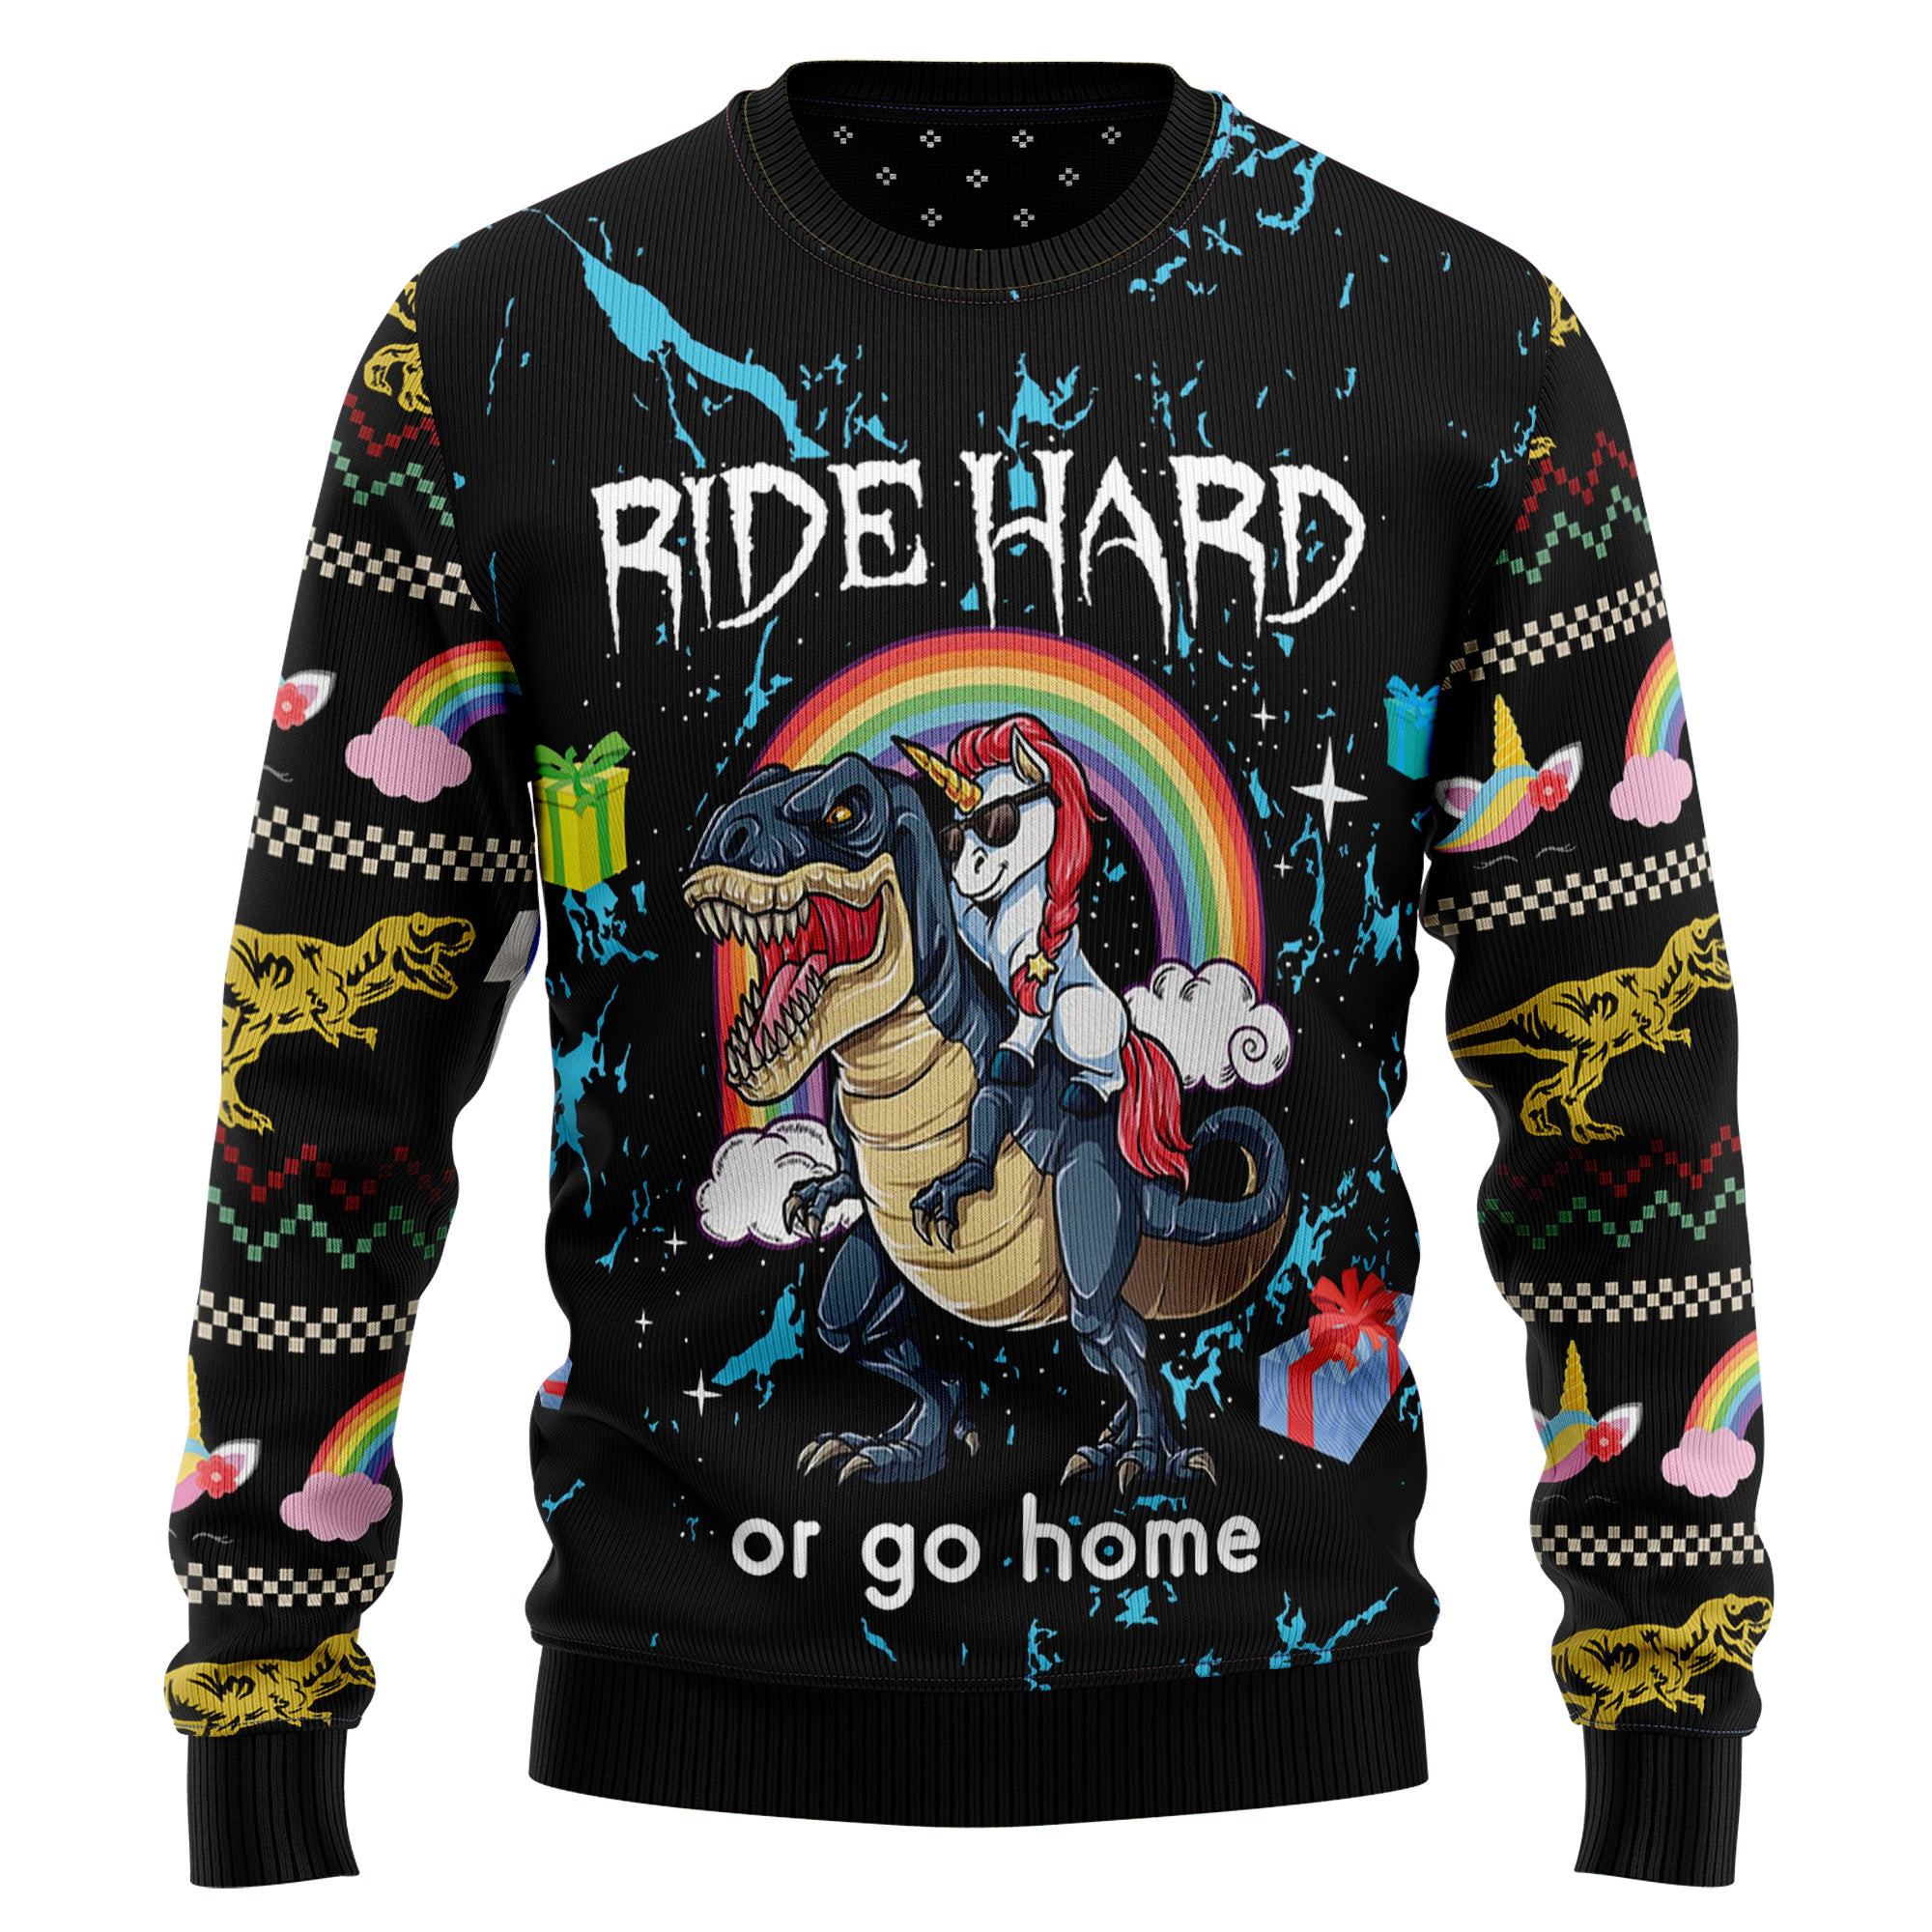 Dinosaur Unicorn Ride Hard Ugly Christmas Sweater, Ugly Sweater For Men Women, Holiday Sweater